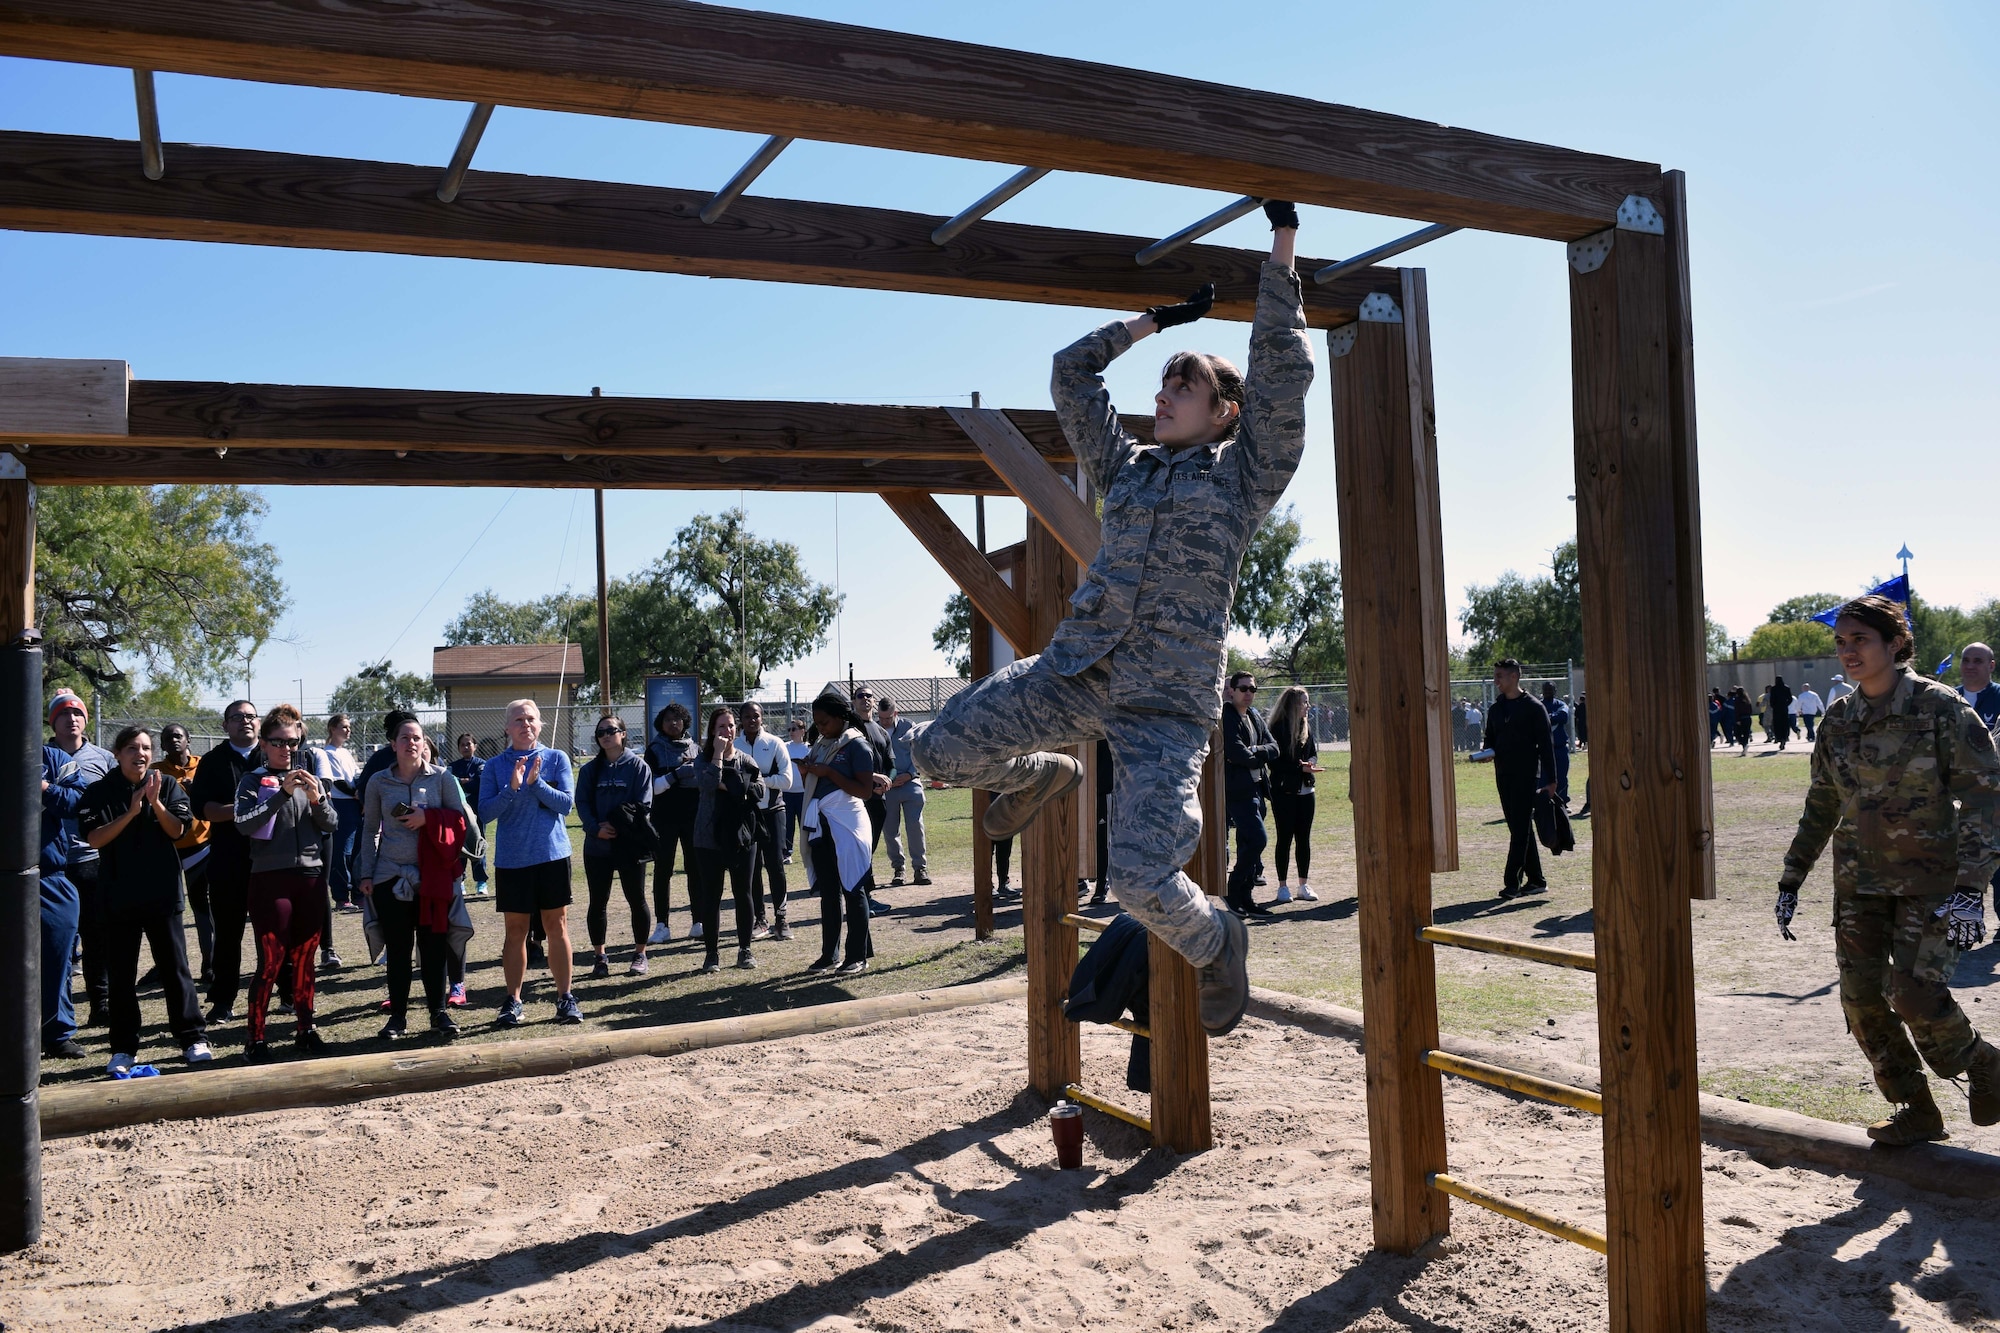 Staff Sgt. Alexis J. Kempel, 433rd Force Support Squadron force management technician, crosses the monkey bars during the 433rd Airlift Wing Resilience Tactical Pause at the Air Force Basic Military Training’s Basic Expeditionary Airman Skills Training site at the Medina Annex, Joint Base San Antonio-Lackland, Texas Nov. 3, 2019.